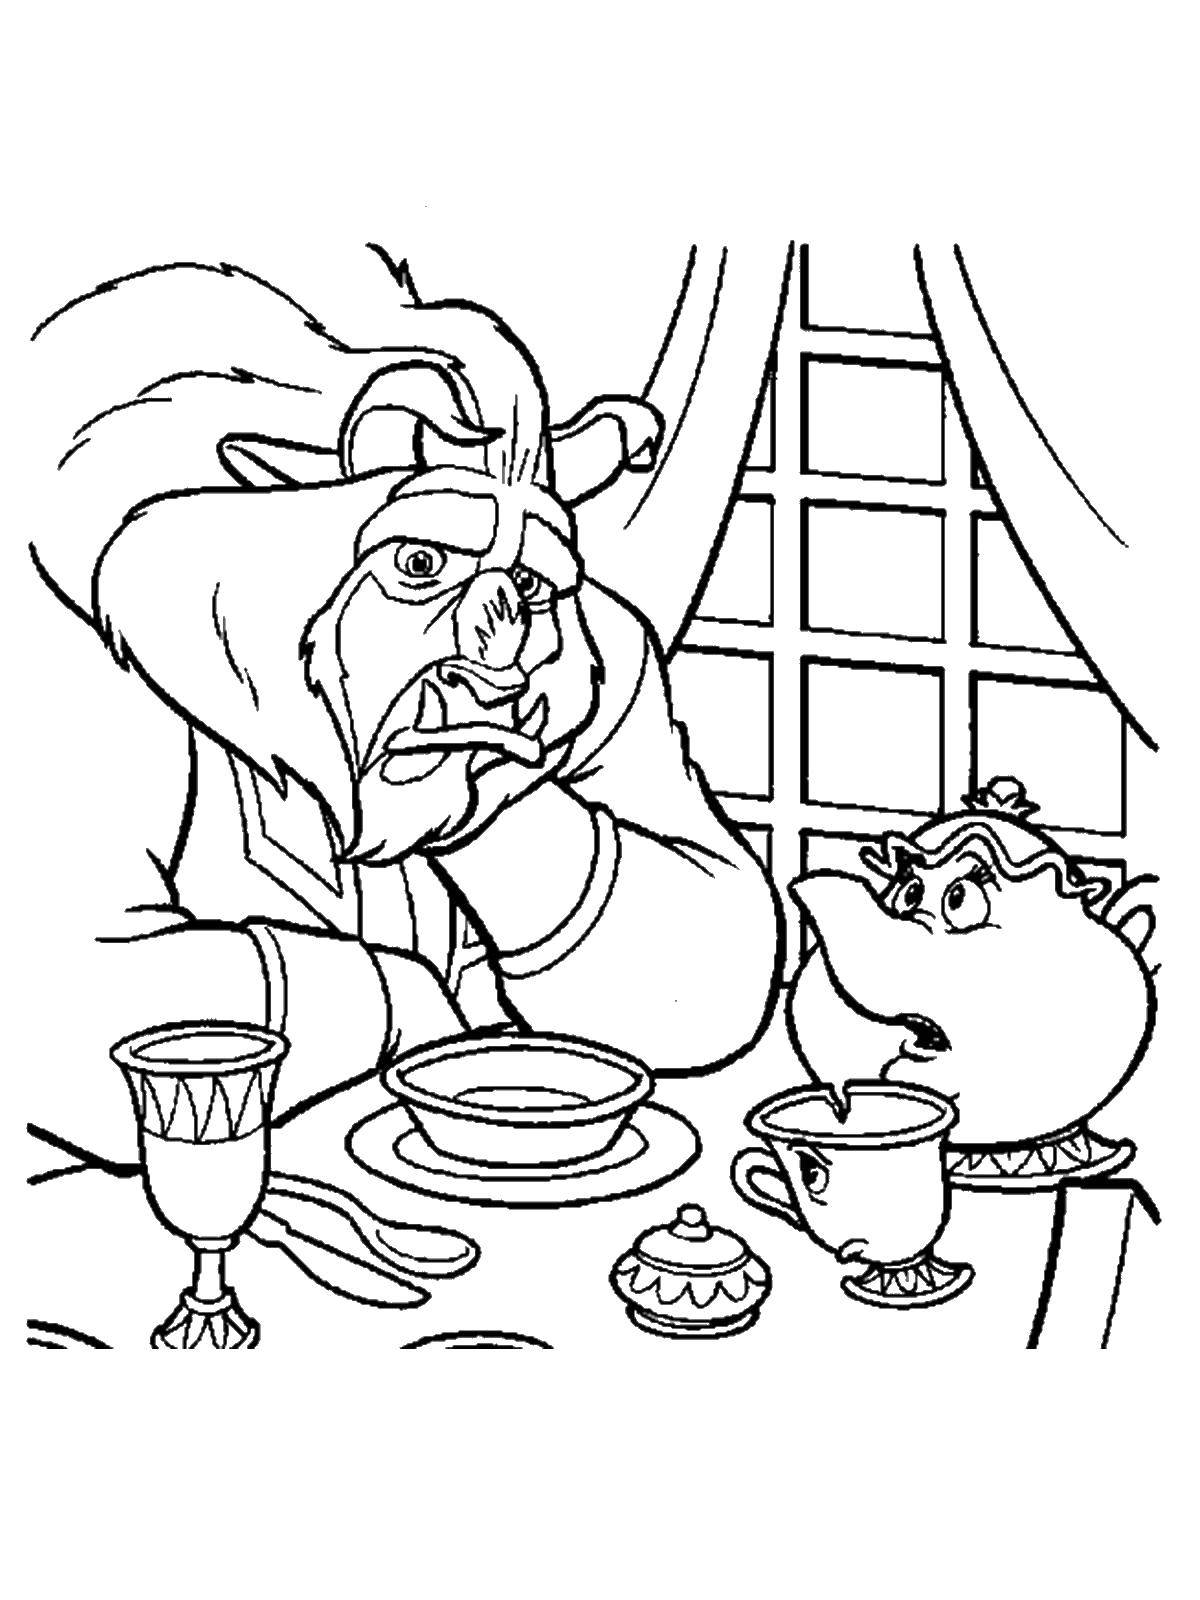 Coloring The monster is sad. Category beauty and the beast. Tags:  Disney, "beauty and the beast".